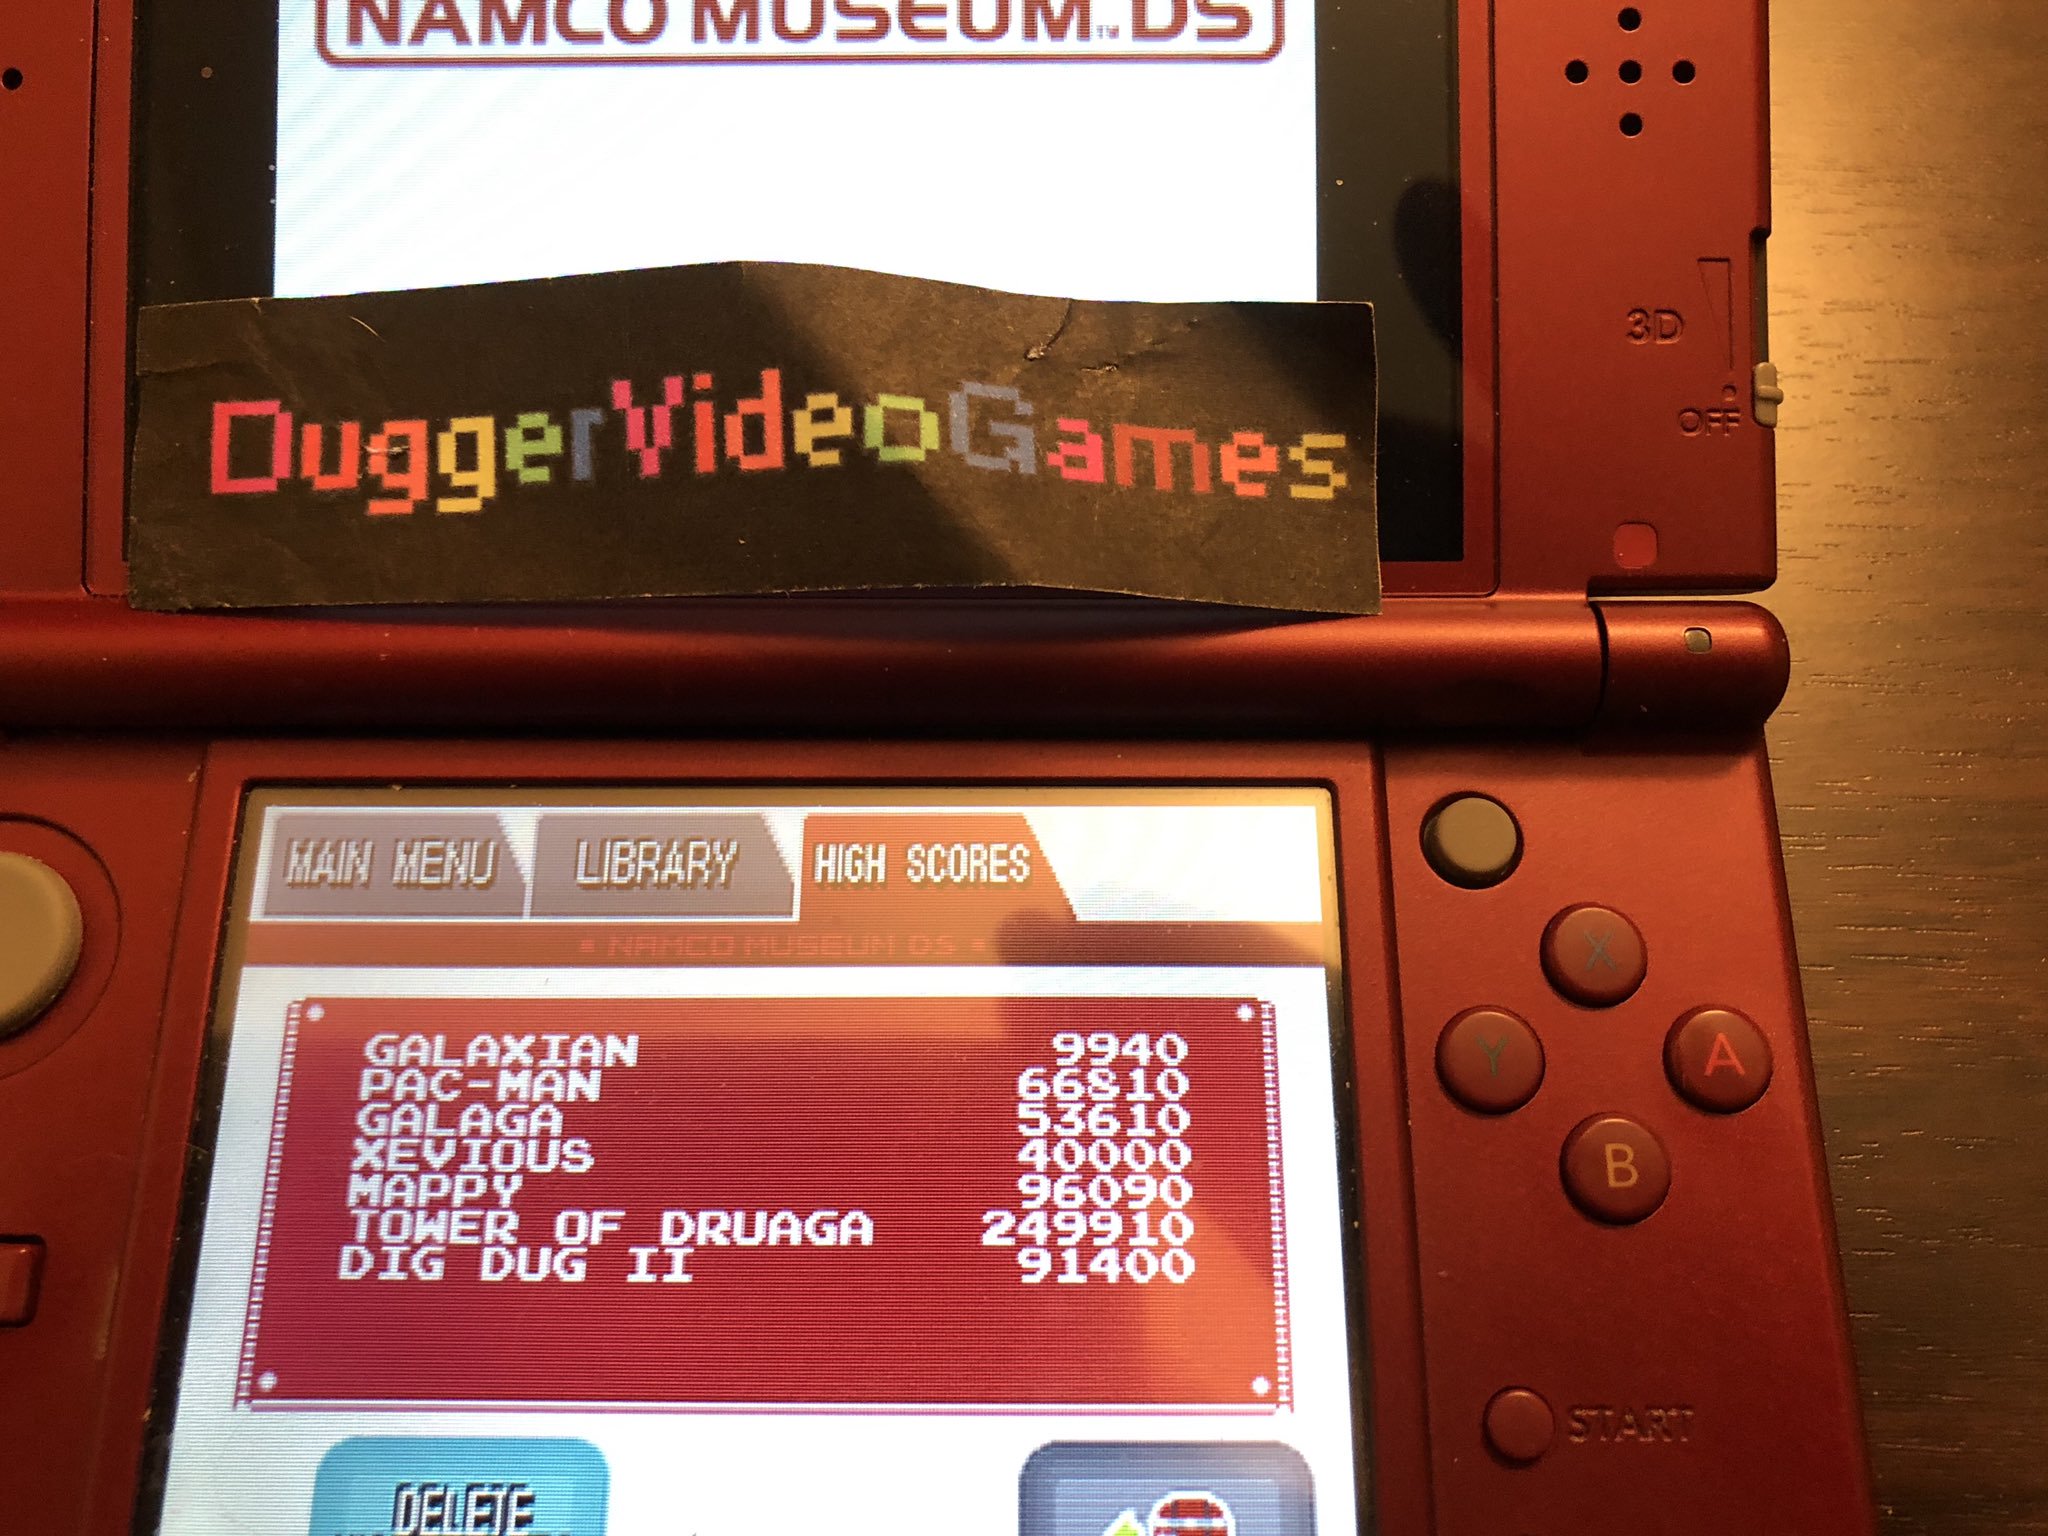 DuggerVideoGames: Namco Museum: Tower of Druaga (Nintendo DS) 249,910 points on 2019-09-03 01:14:26